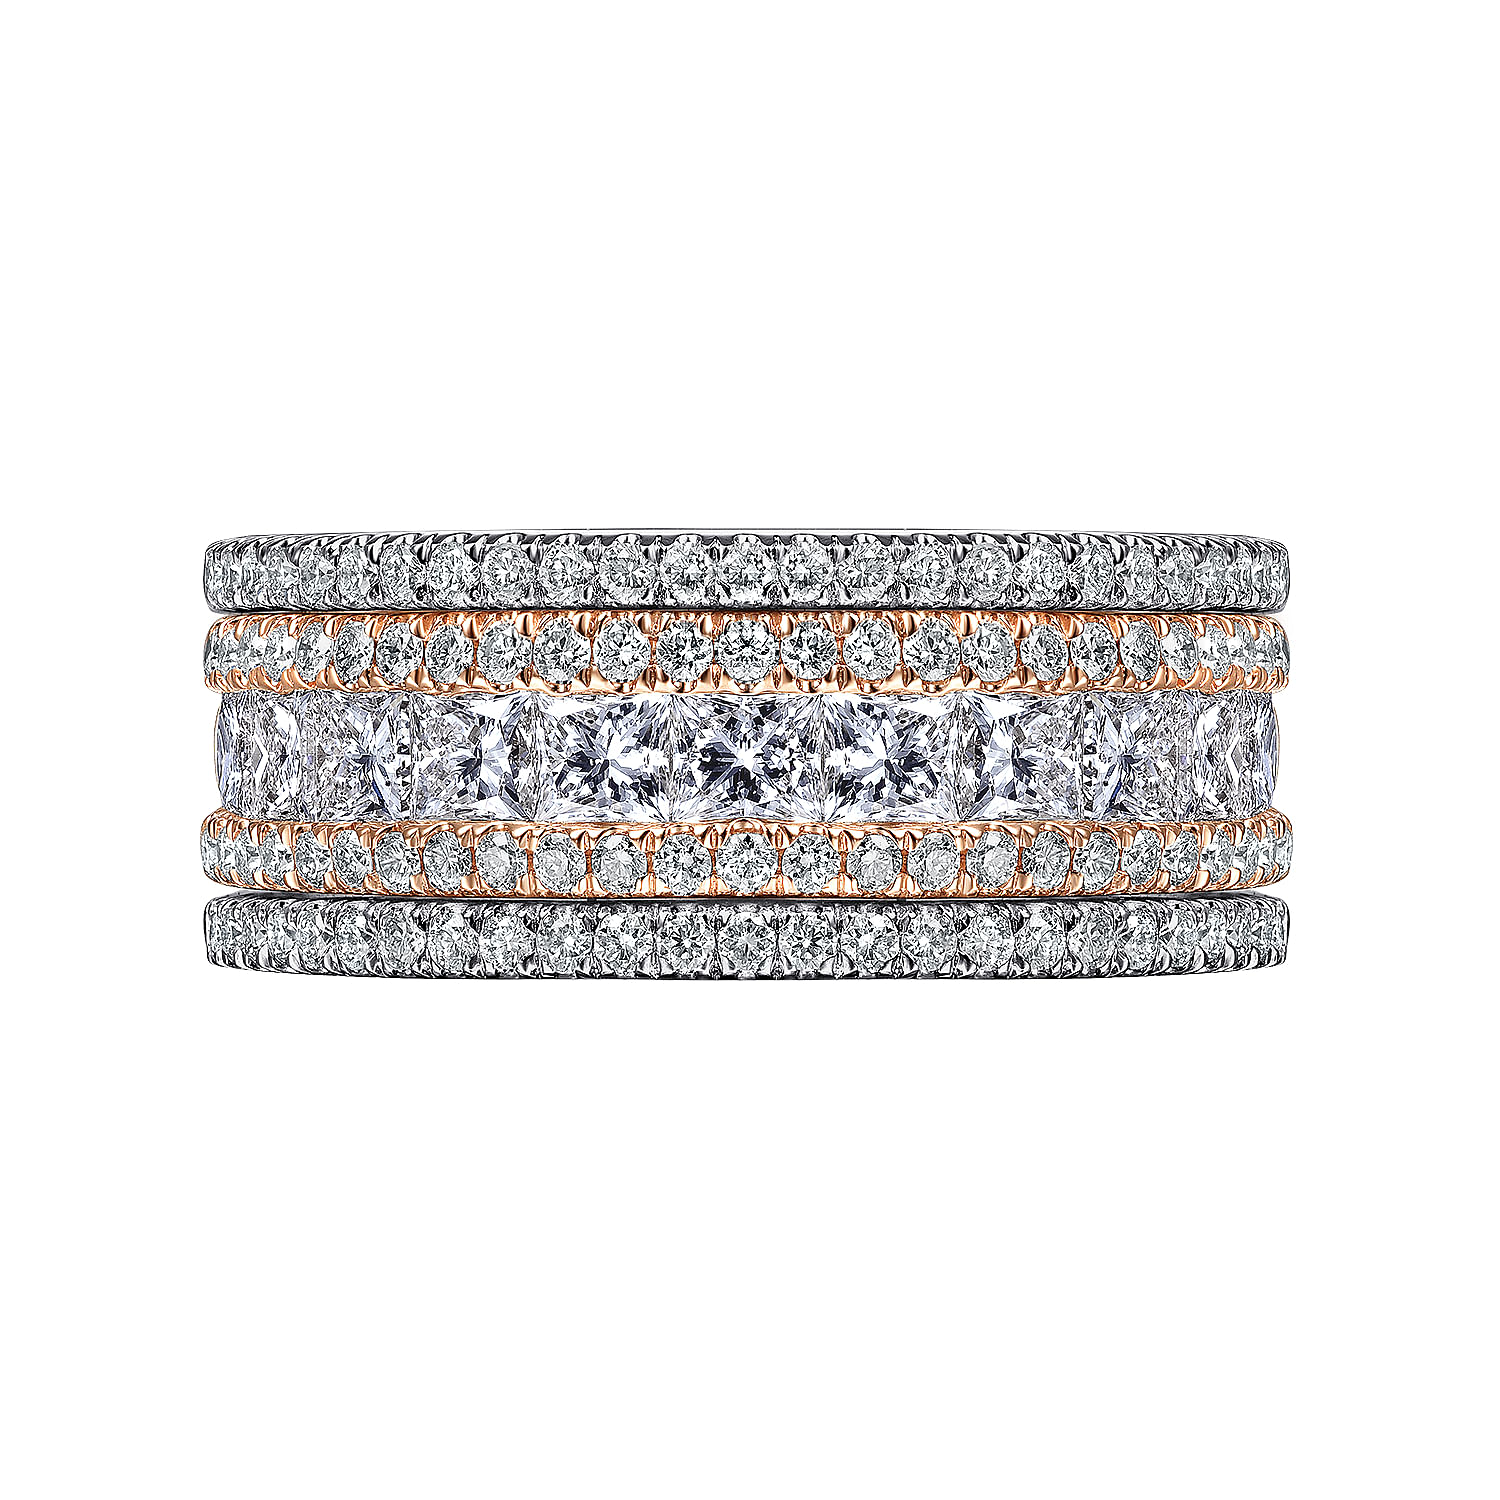 Wide 14K White-Rose Gold Channel Set Diamond  Anniversary Band with Round and Princess Cut Diamonds